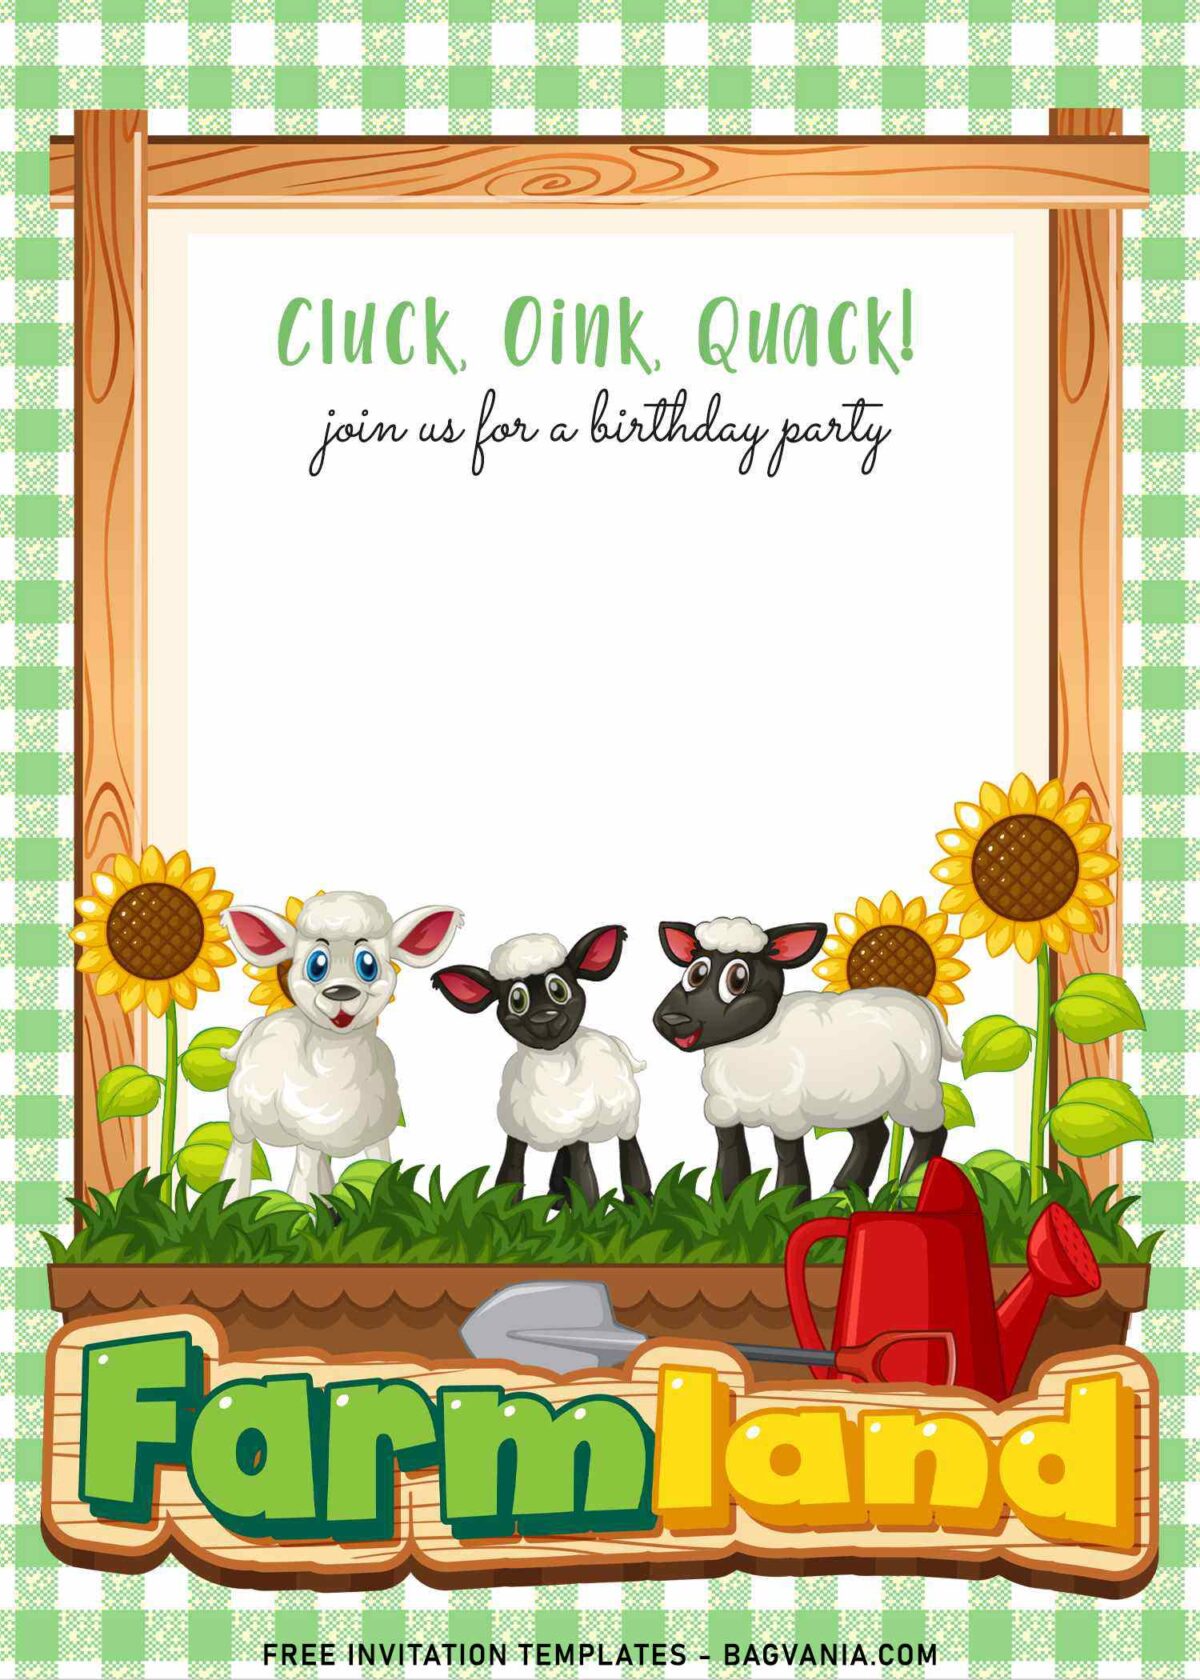 7+ Farm Animals And Garden Flowers Birthday Invitation Templates with adorable sheeps